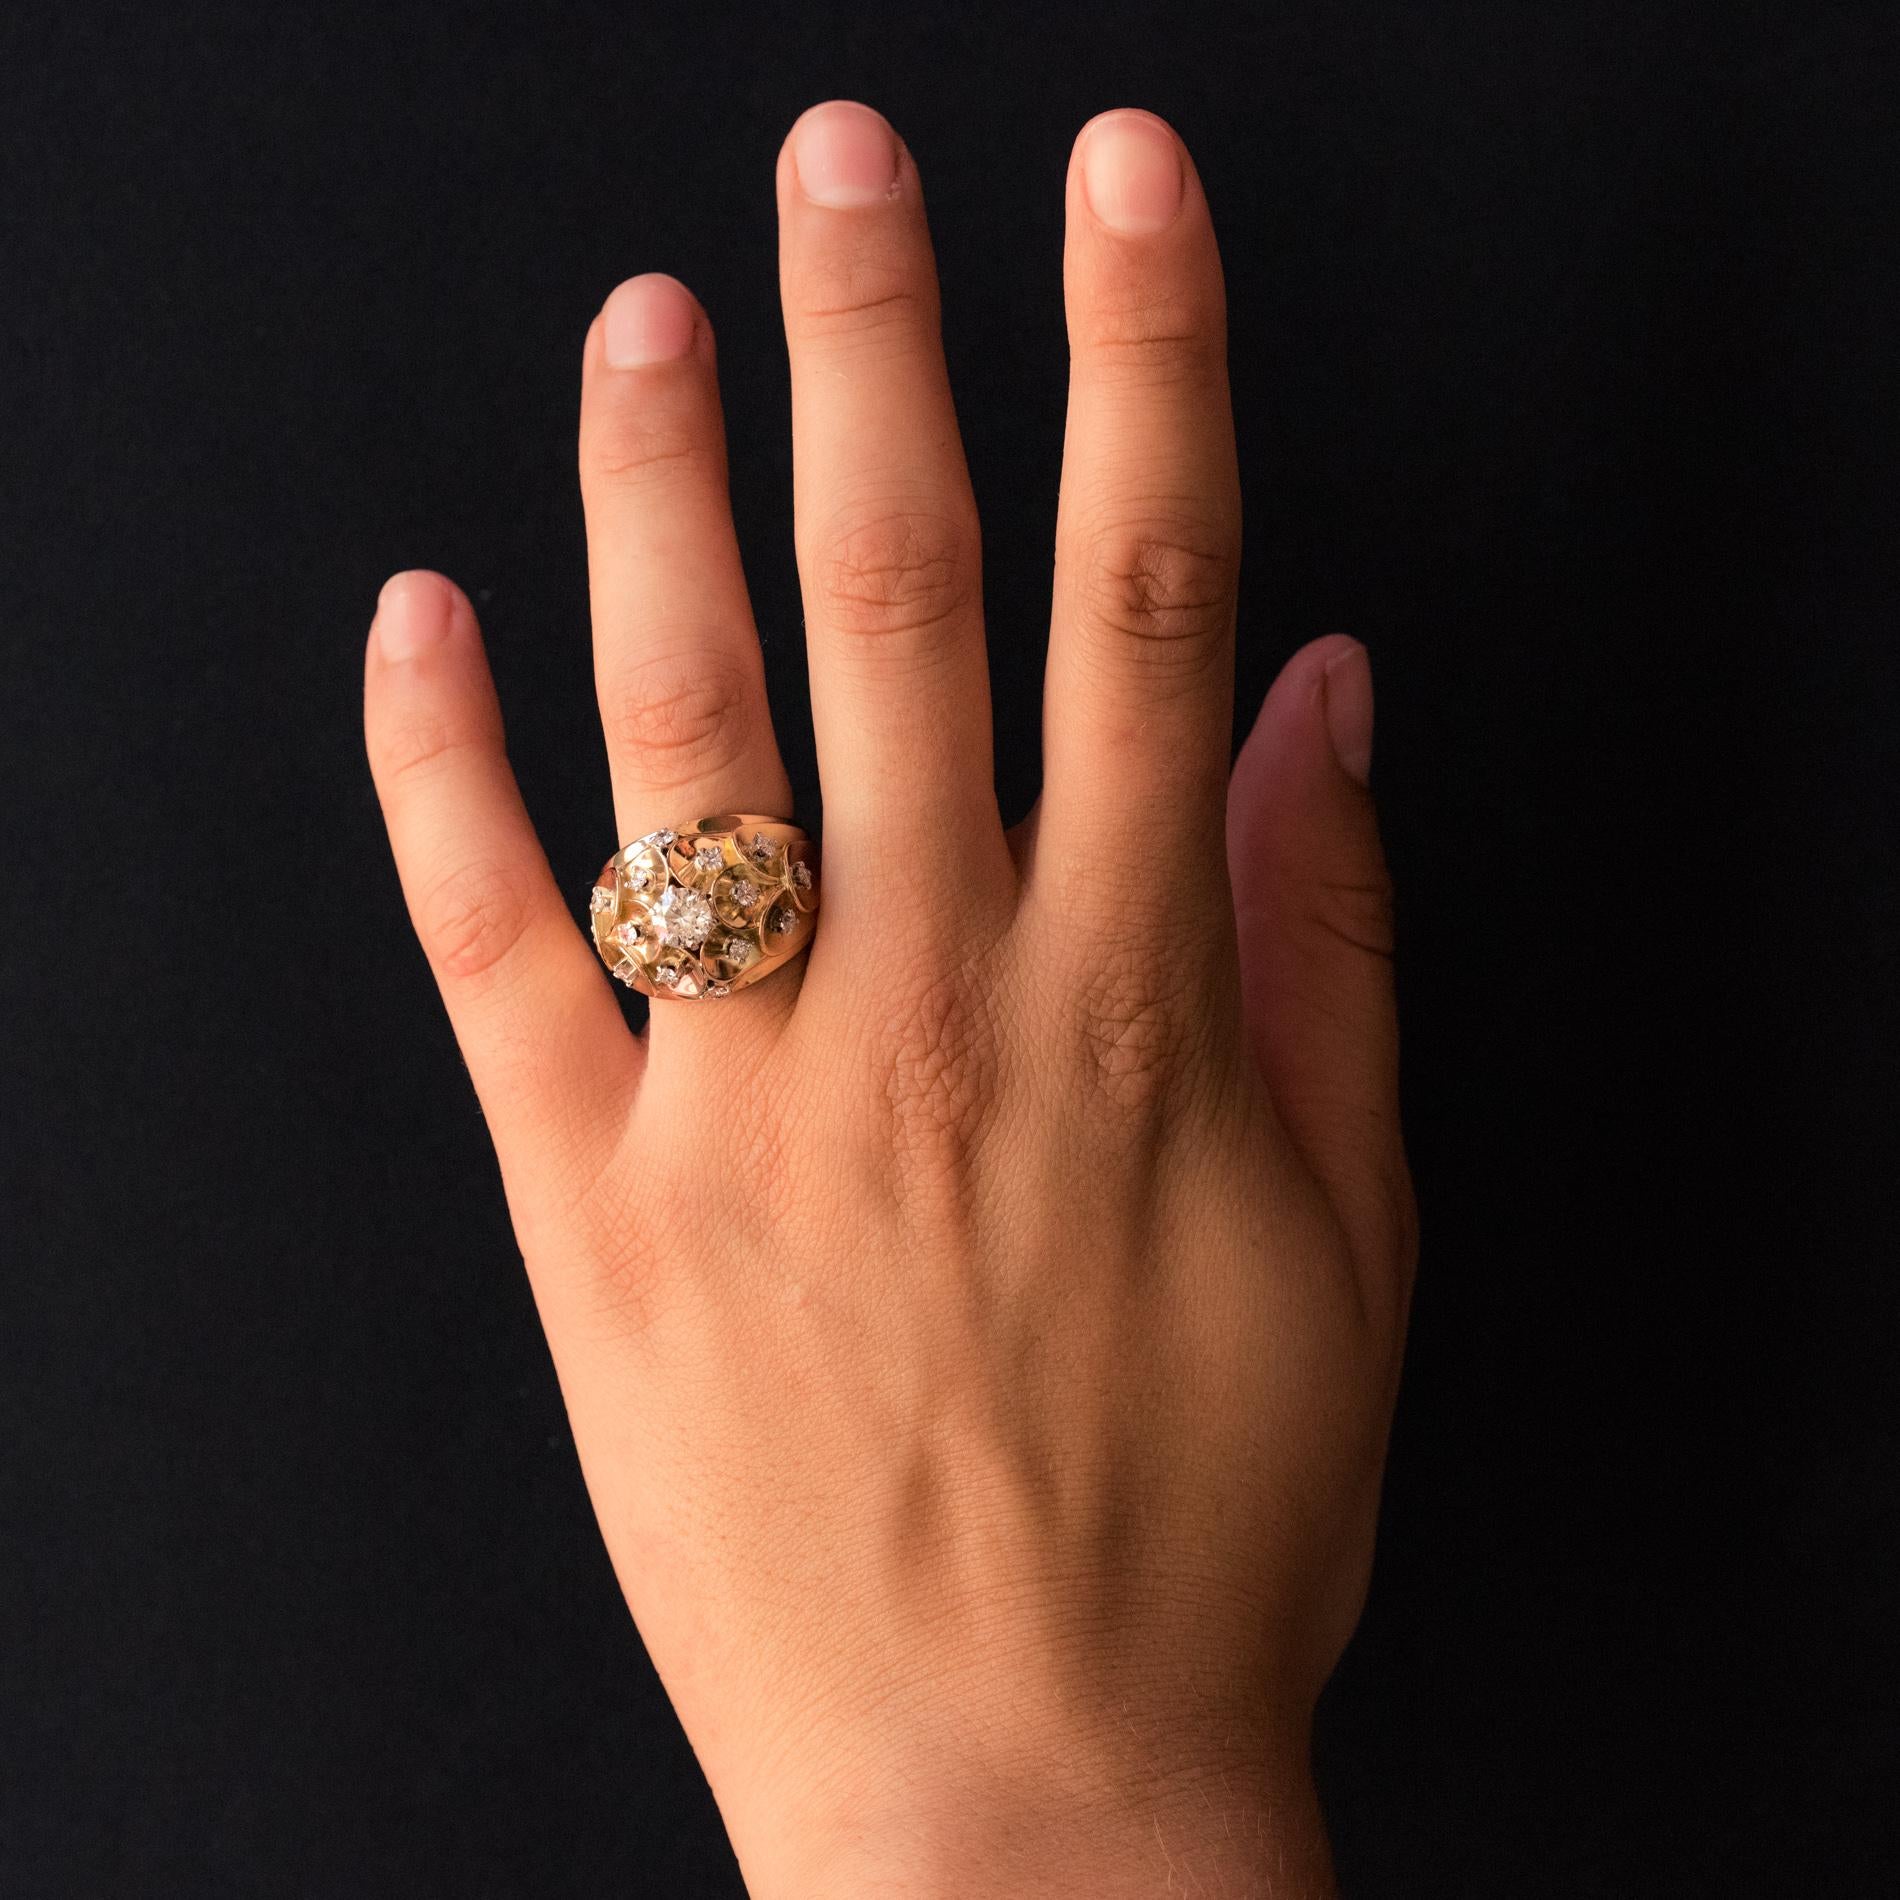 Ring in 18 karat yellow gold, eagle's head hallmark and platinum dog's head hallmark.
Dome ring, this important retro ring is set on its top, on platinum, with an antique brilliant-cut diamond. The dome is formed of gold petals each set on platinum